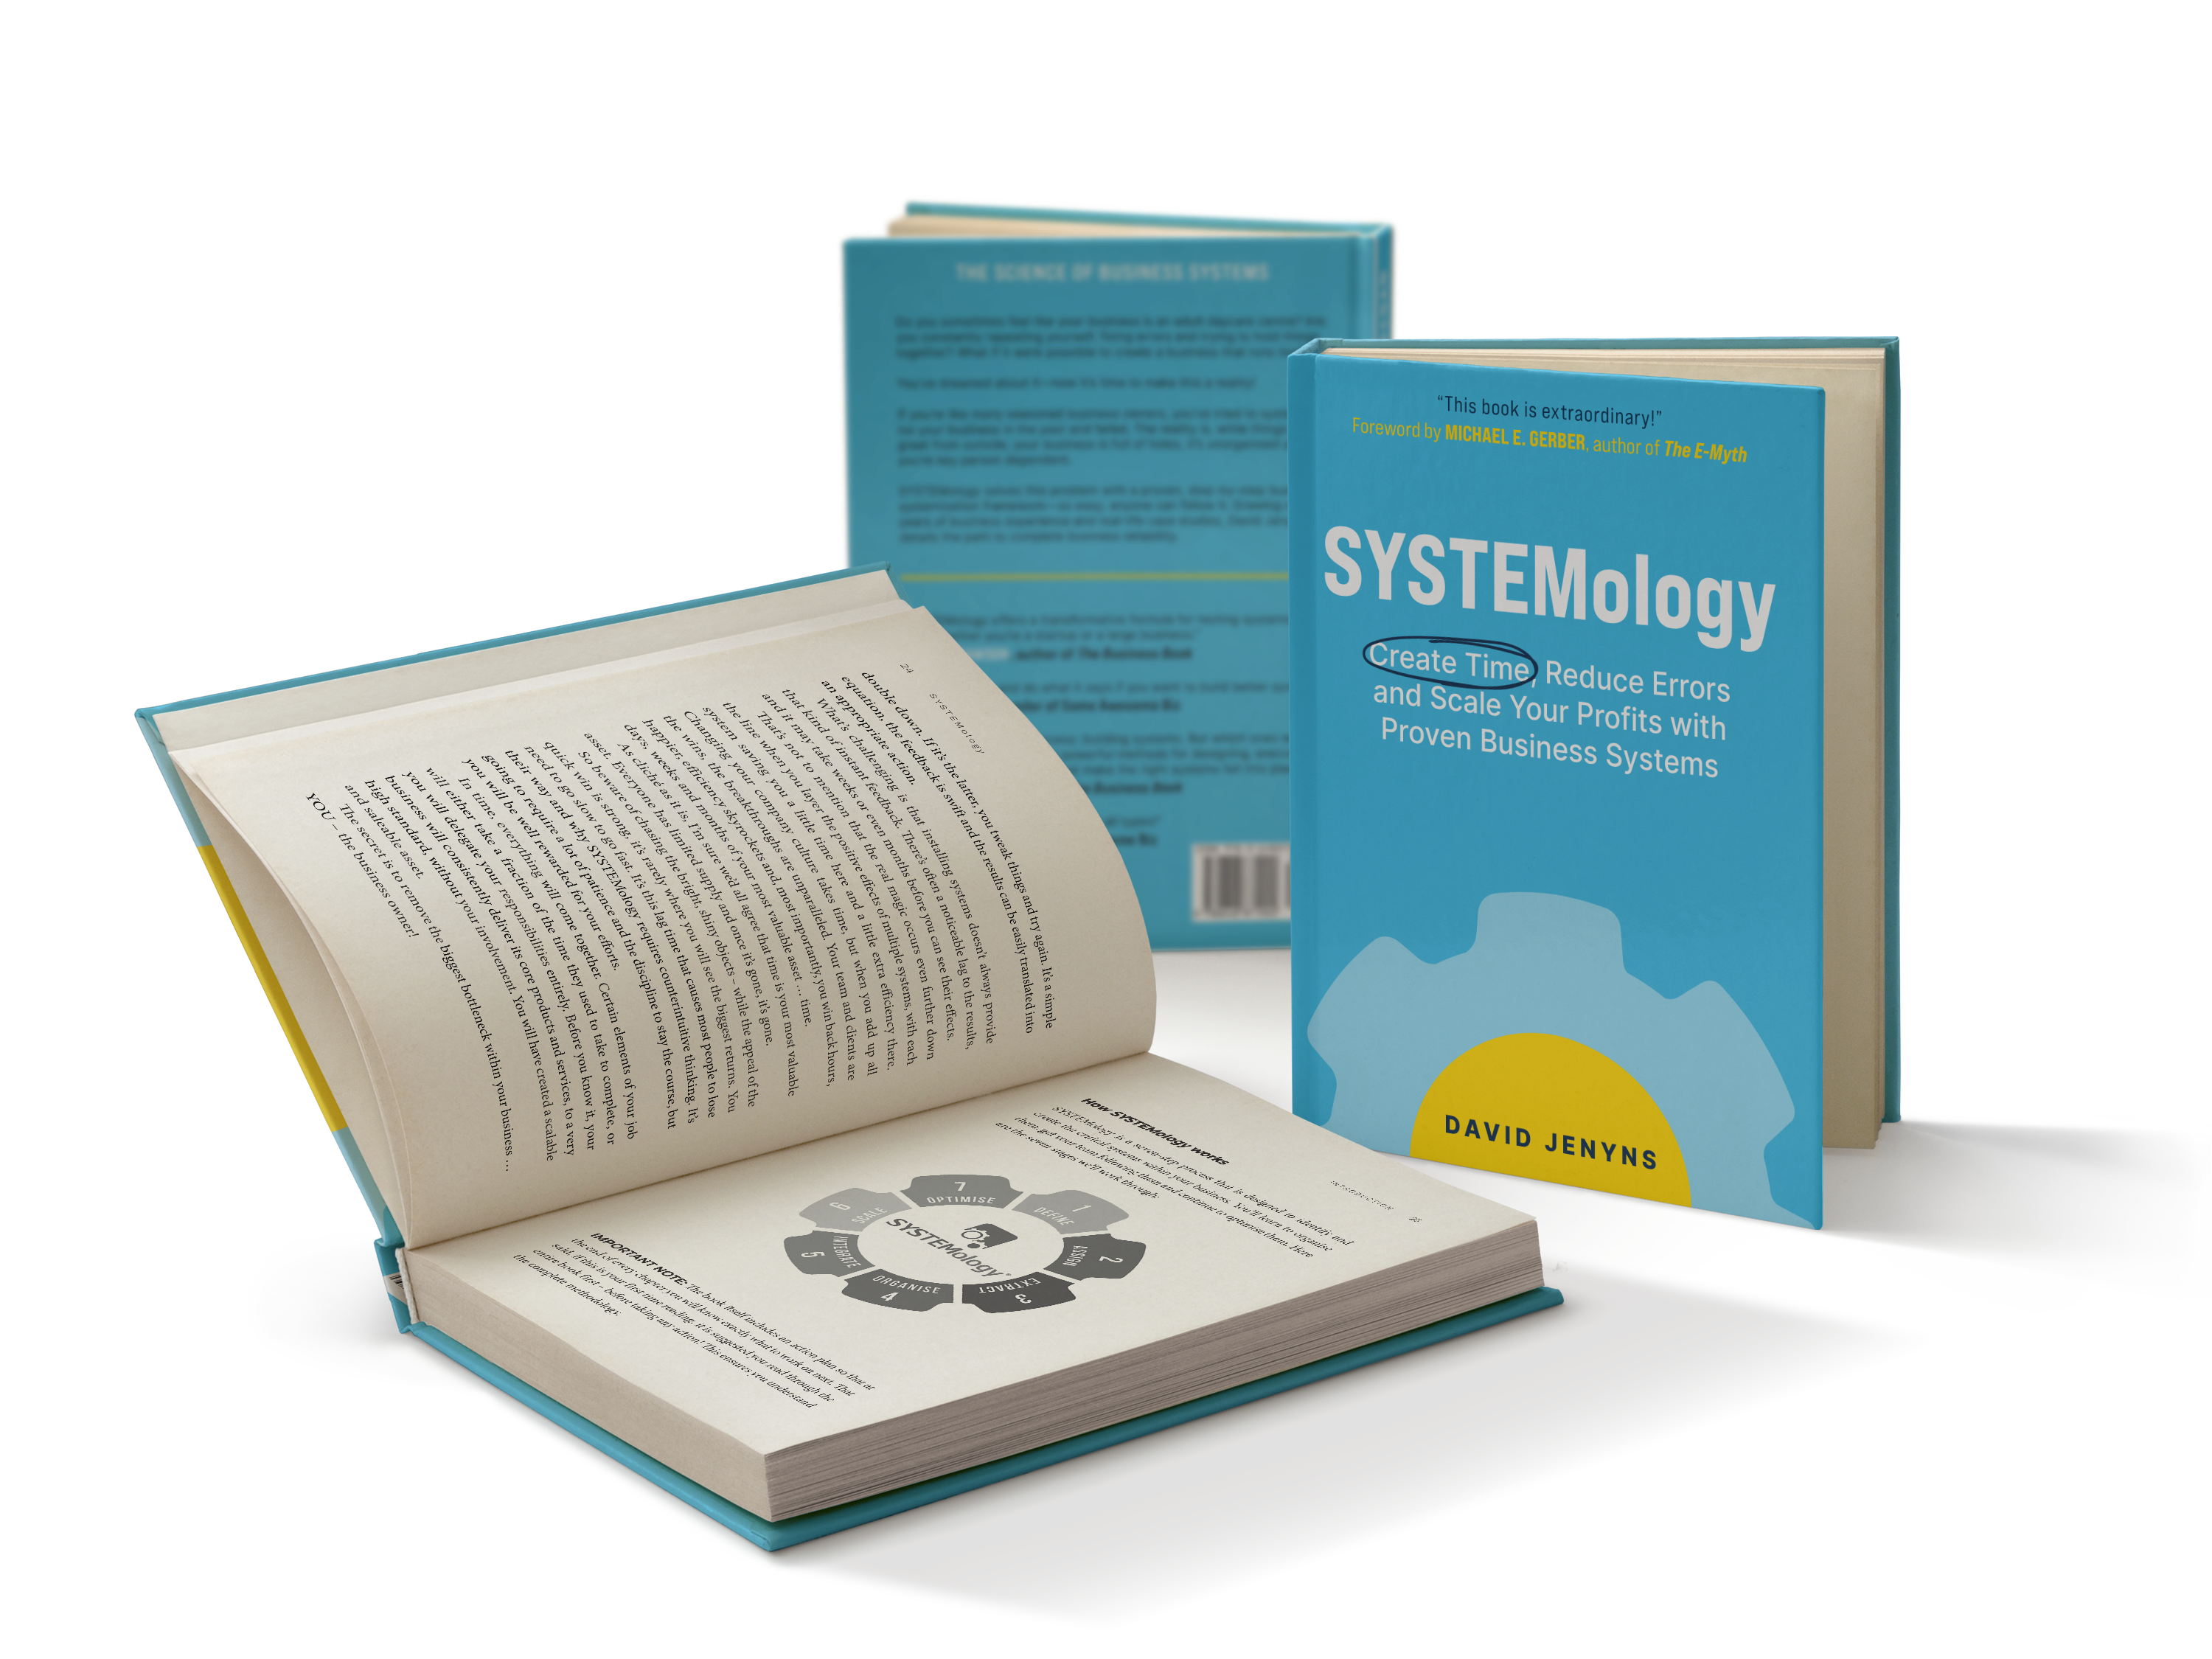 SYSTEMology book review by David Jenyns